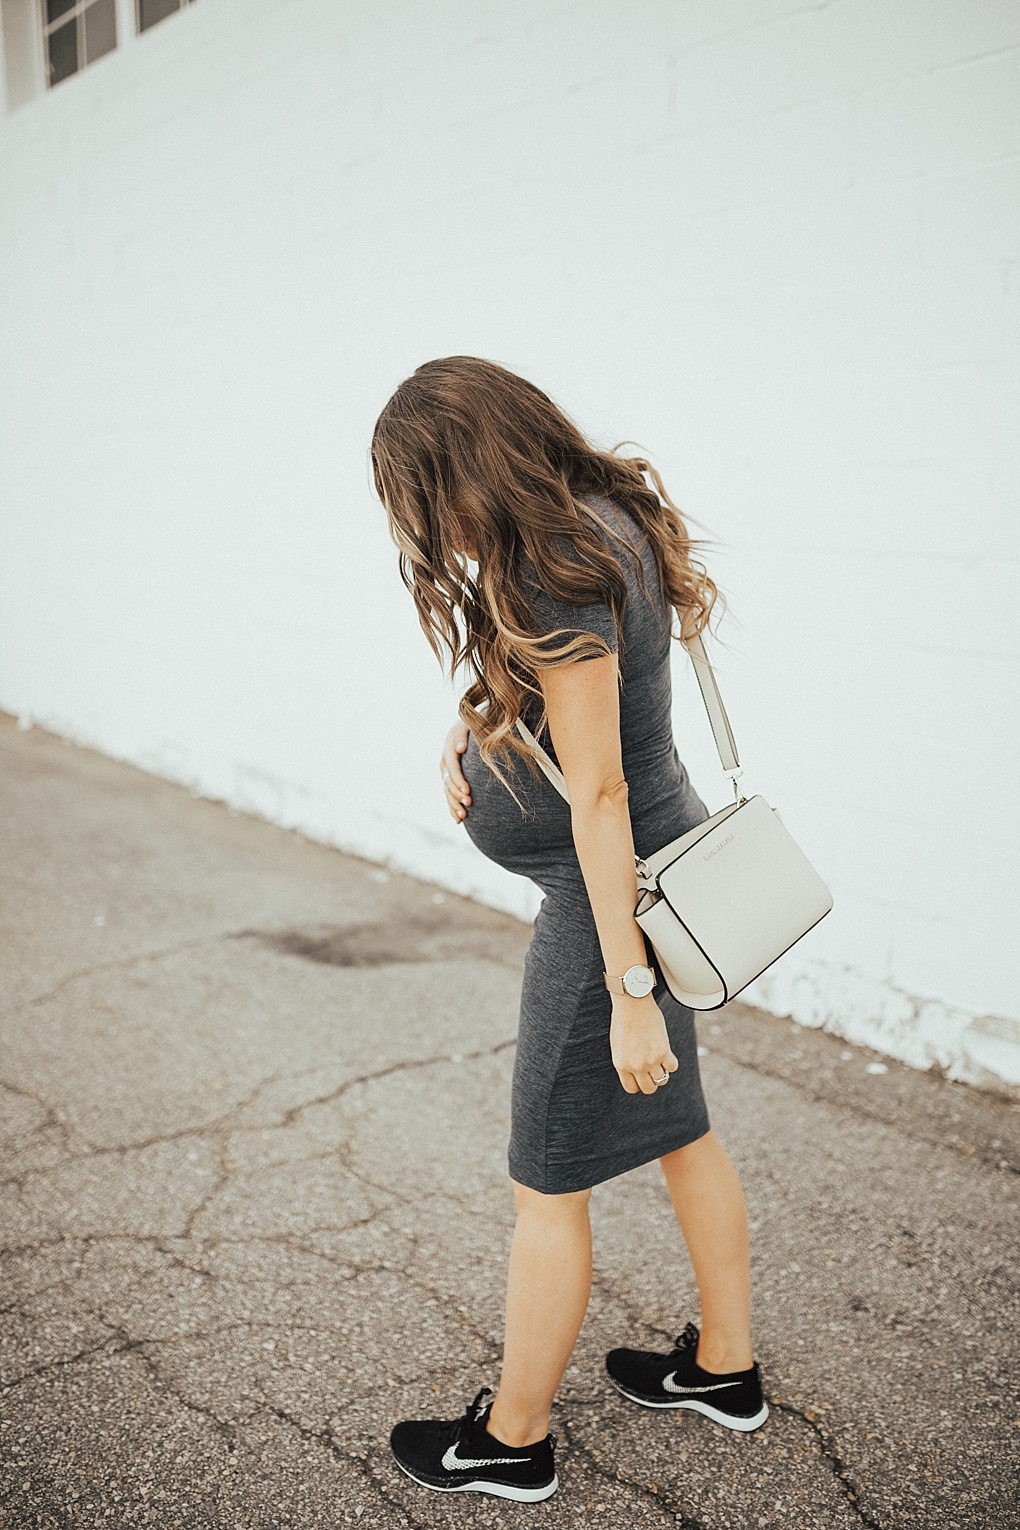 SAVE this ASAP for the perfect tips on how to style a momiform look thanks to Utah Style Blogger Dani Marie. 